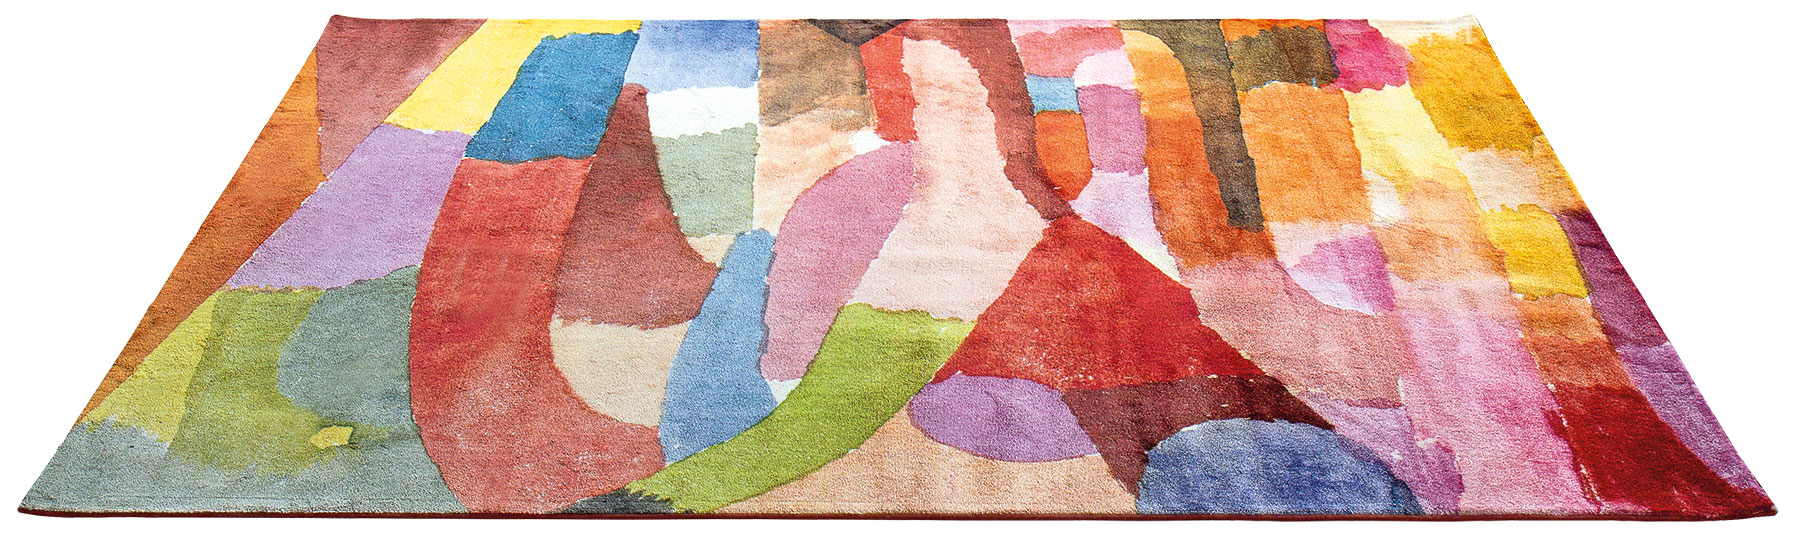 Carpet "Movement of Vaulted Chambers" (230 x 160 cm) by Paul Klee